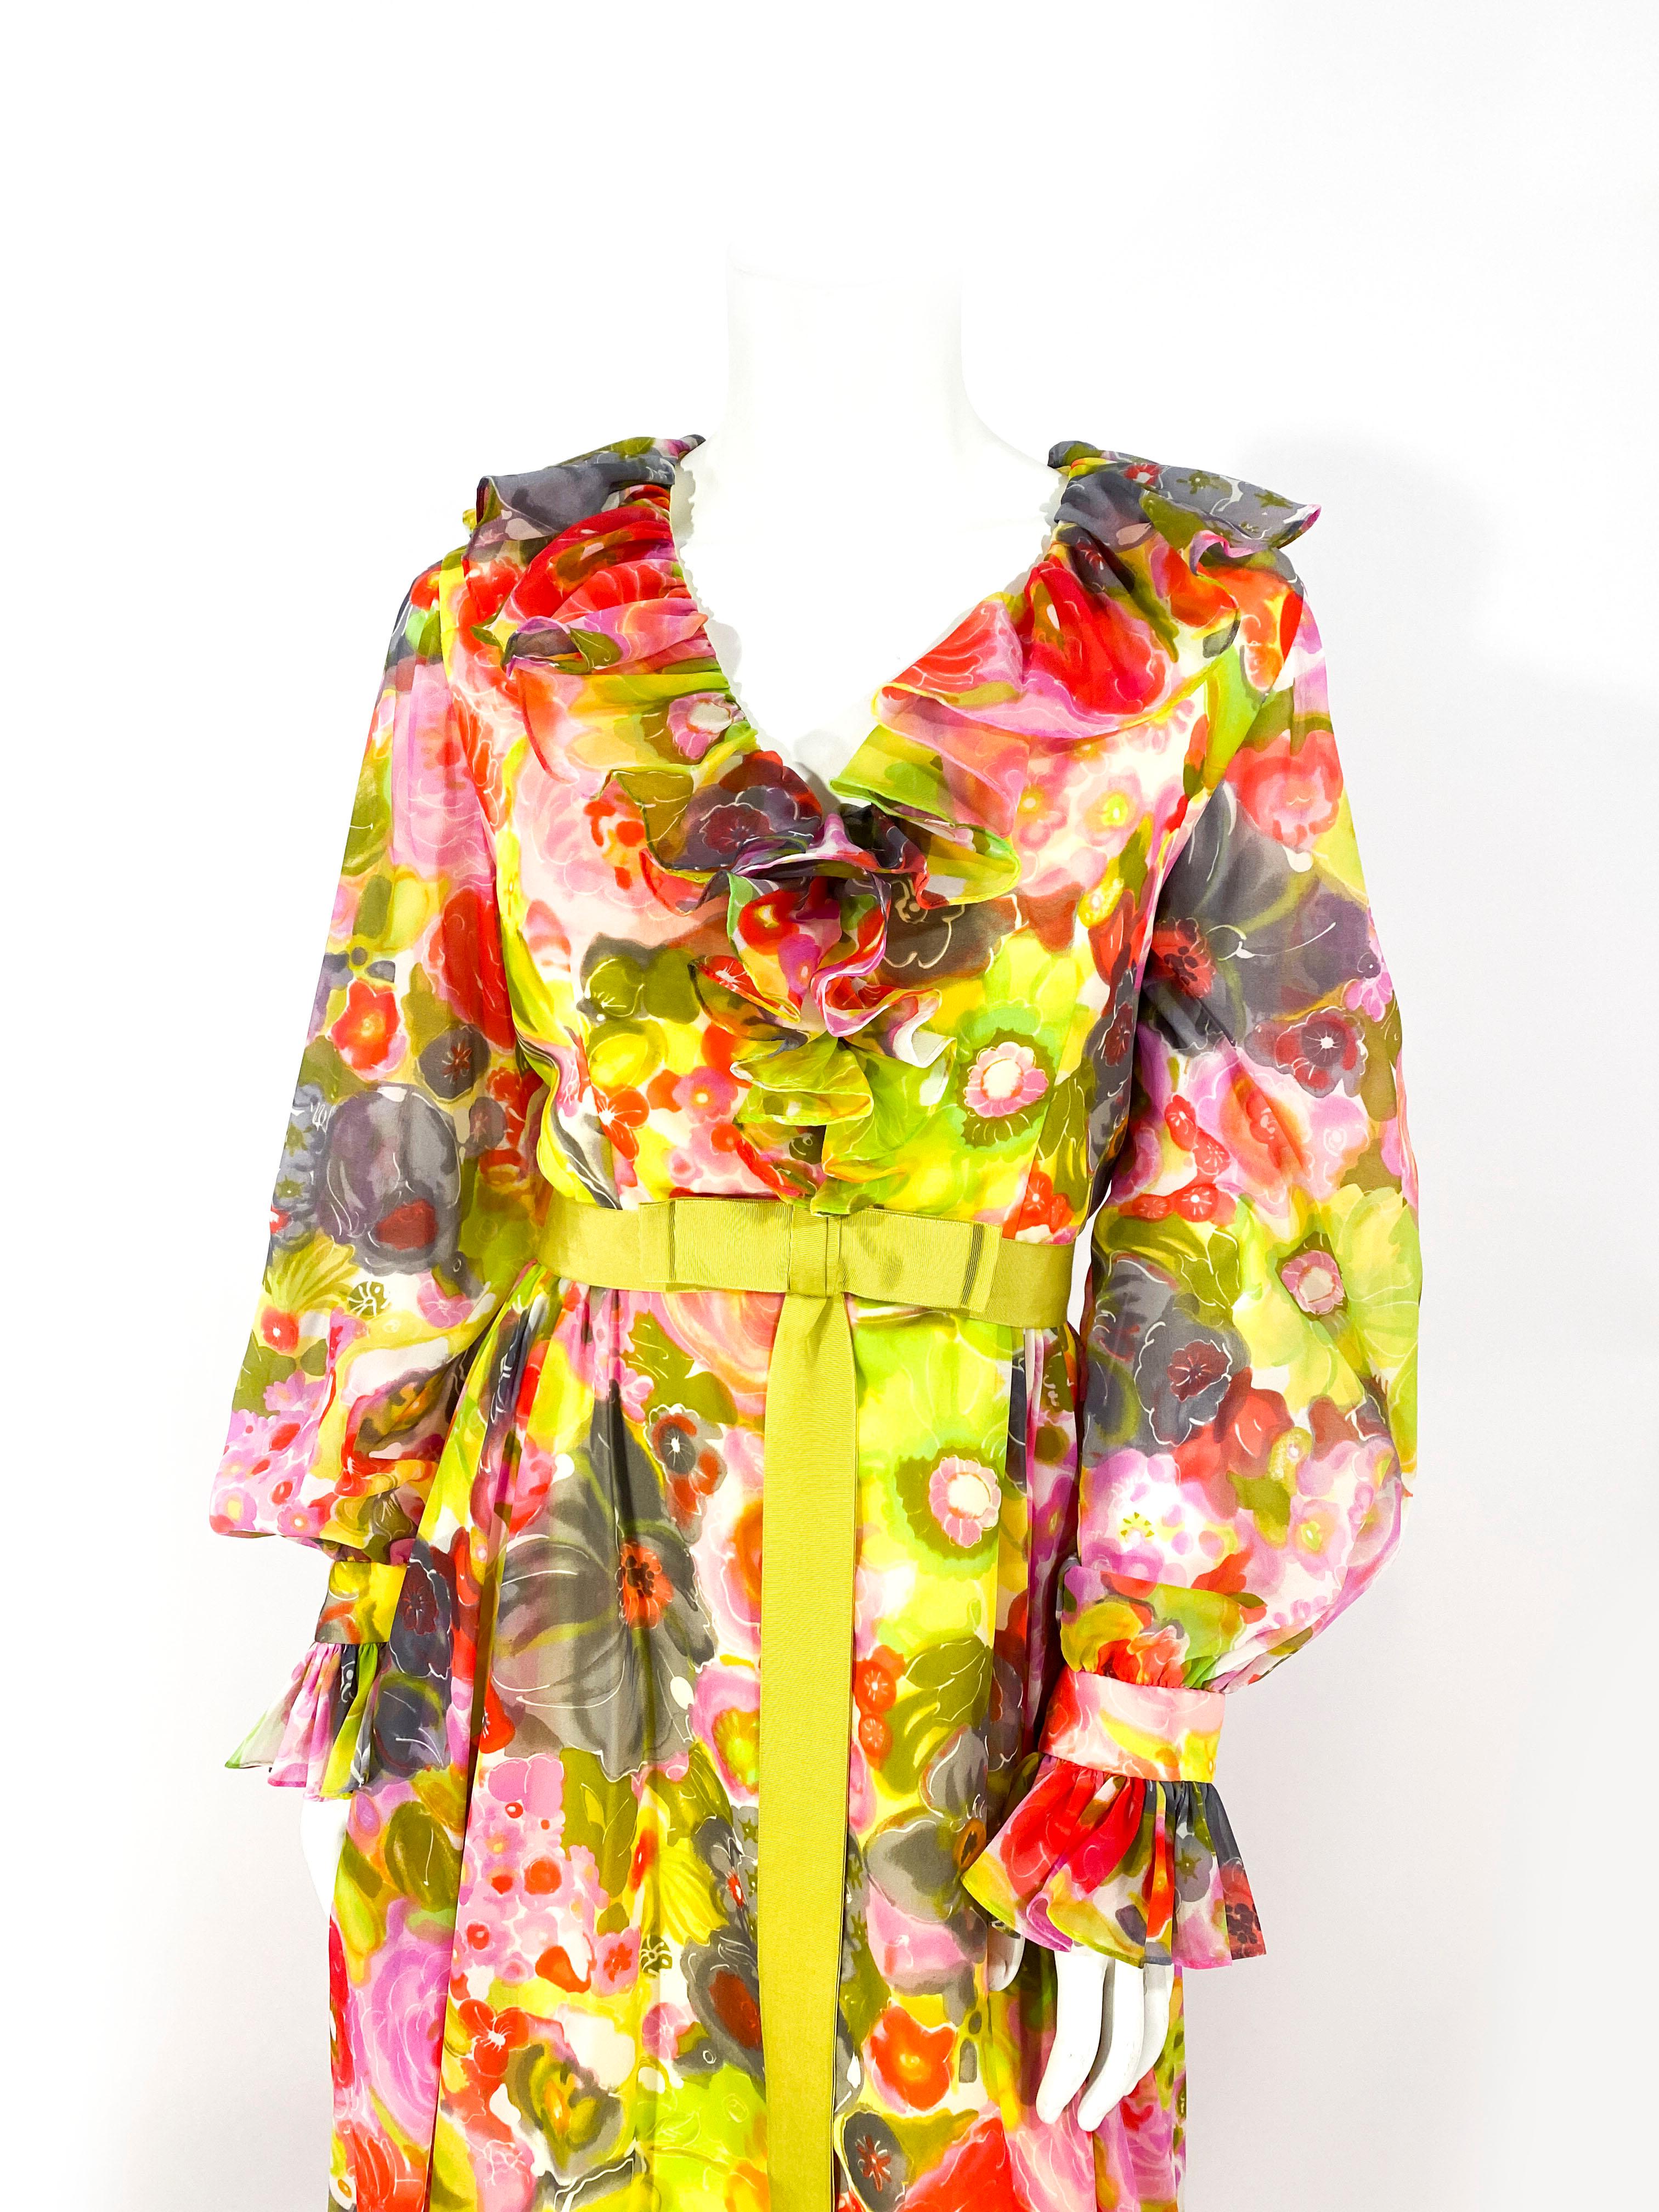 1970s neon multicolored floral printed polyester chiffon dress featuring a full length skirt, deep ruffled v-neckline, matching chartreuse gros-grain waist bow accent, billowing sheer sleeves, and wide ruffled cuffs. 